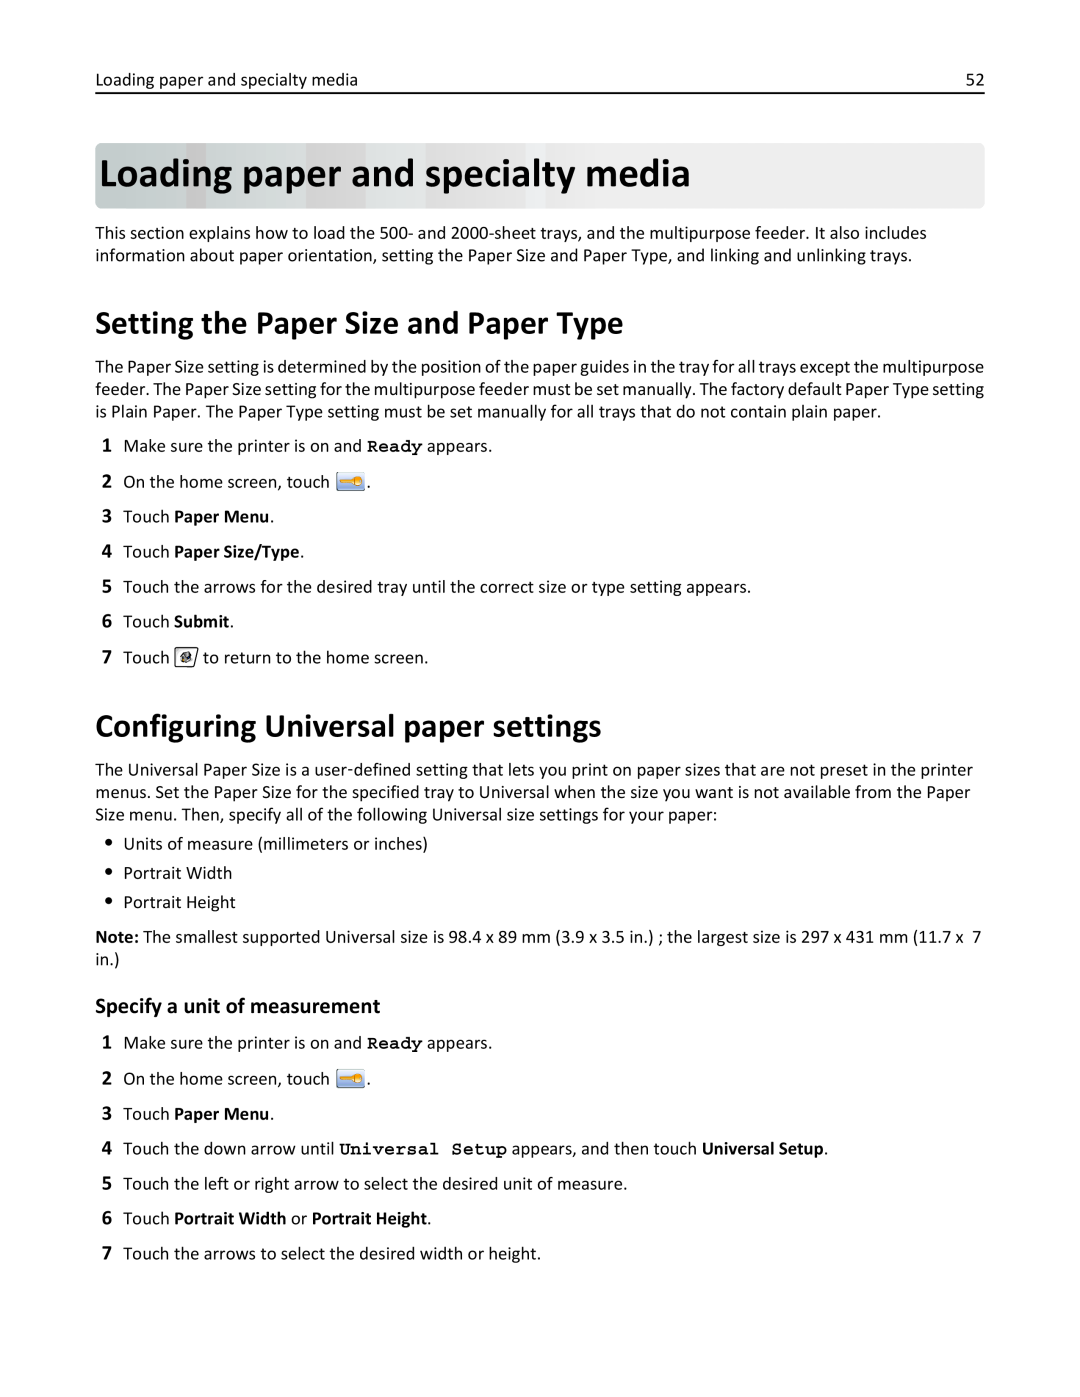 Lexmark 19Z0202, 432 Loadingpaperand specialty media, Setting the Paper Size and Paper Type, Specify a unit of measurement 